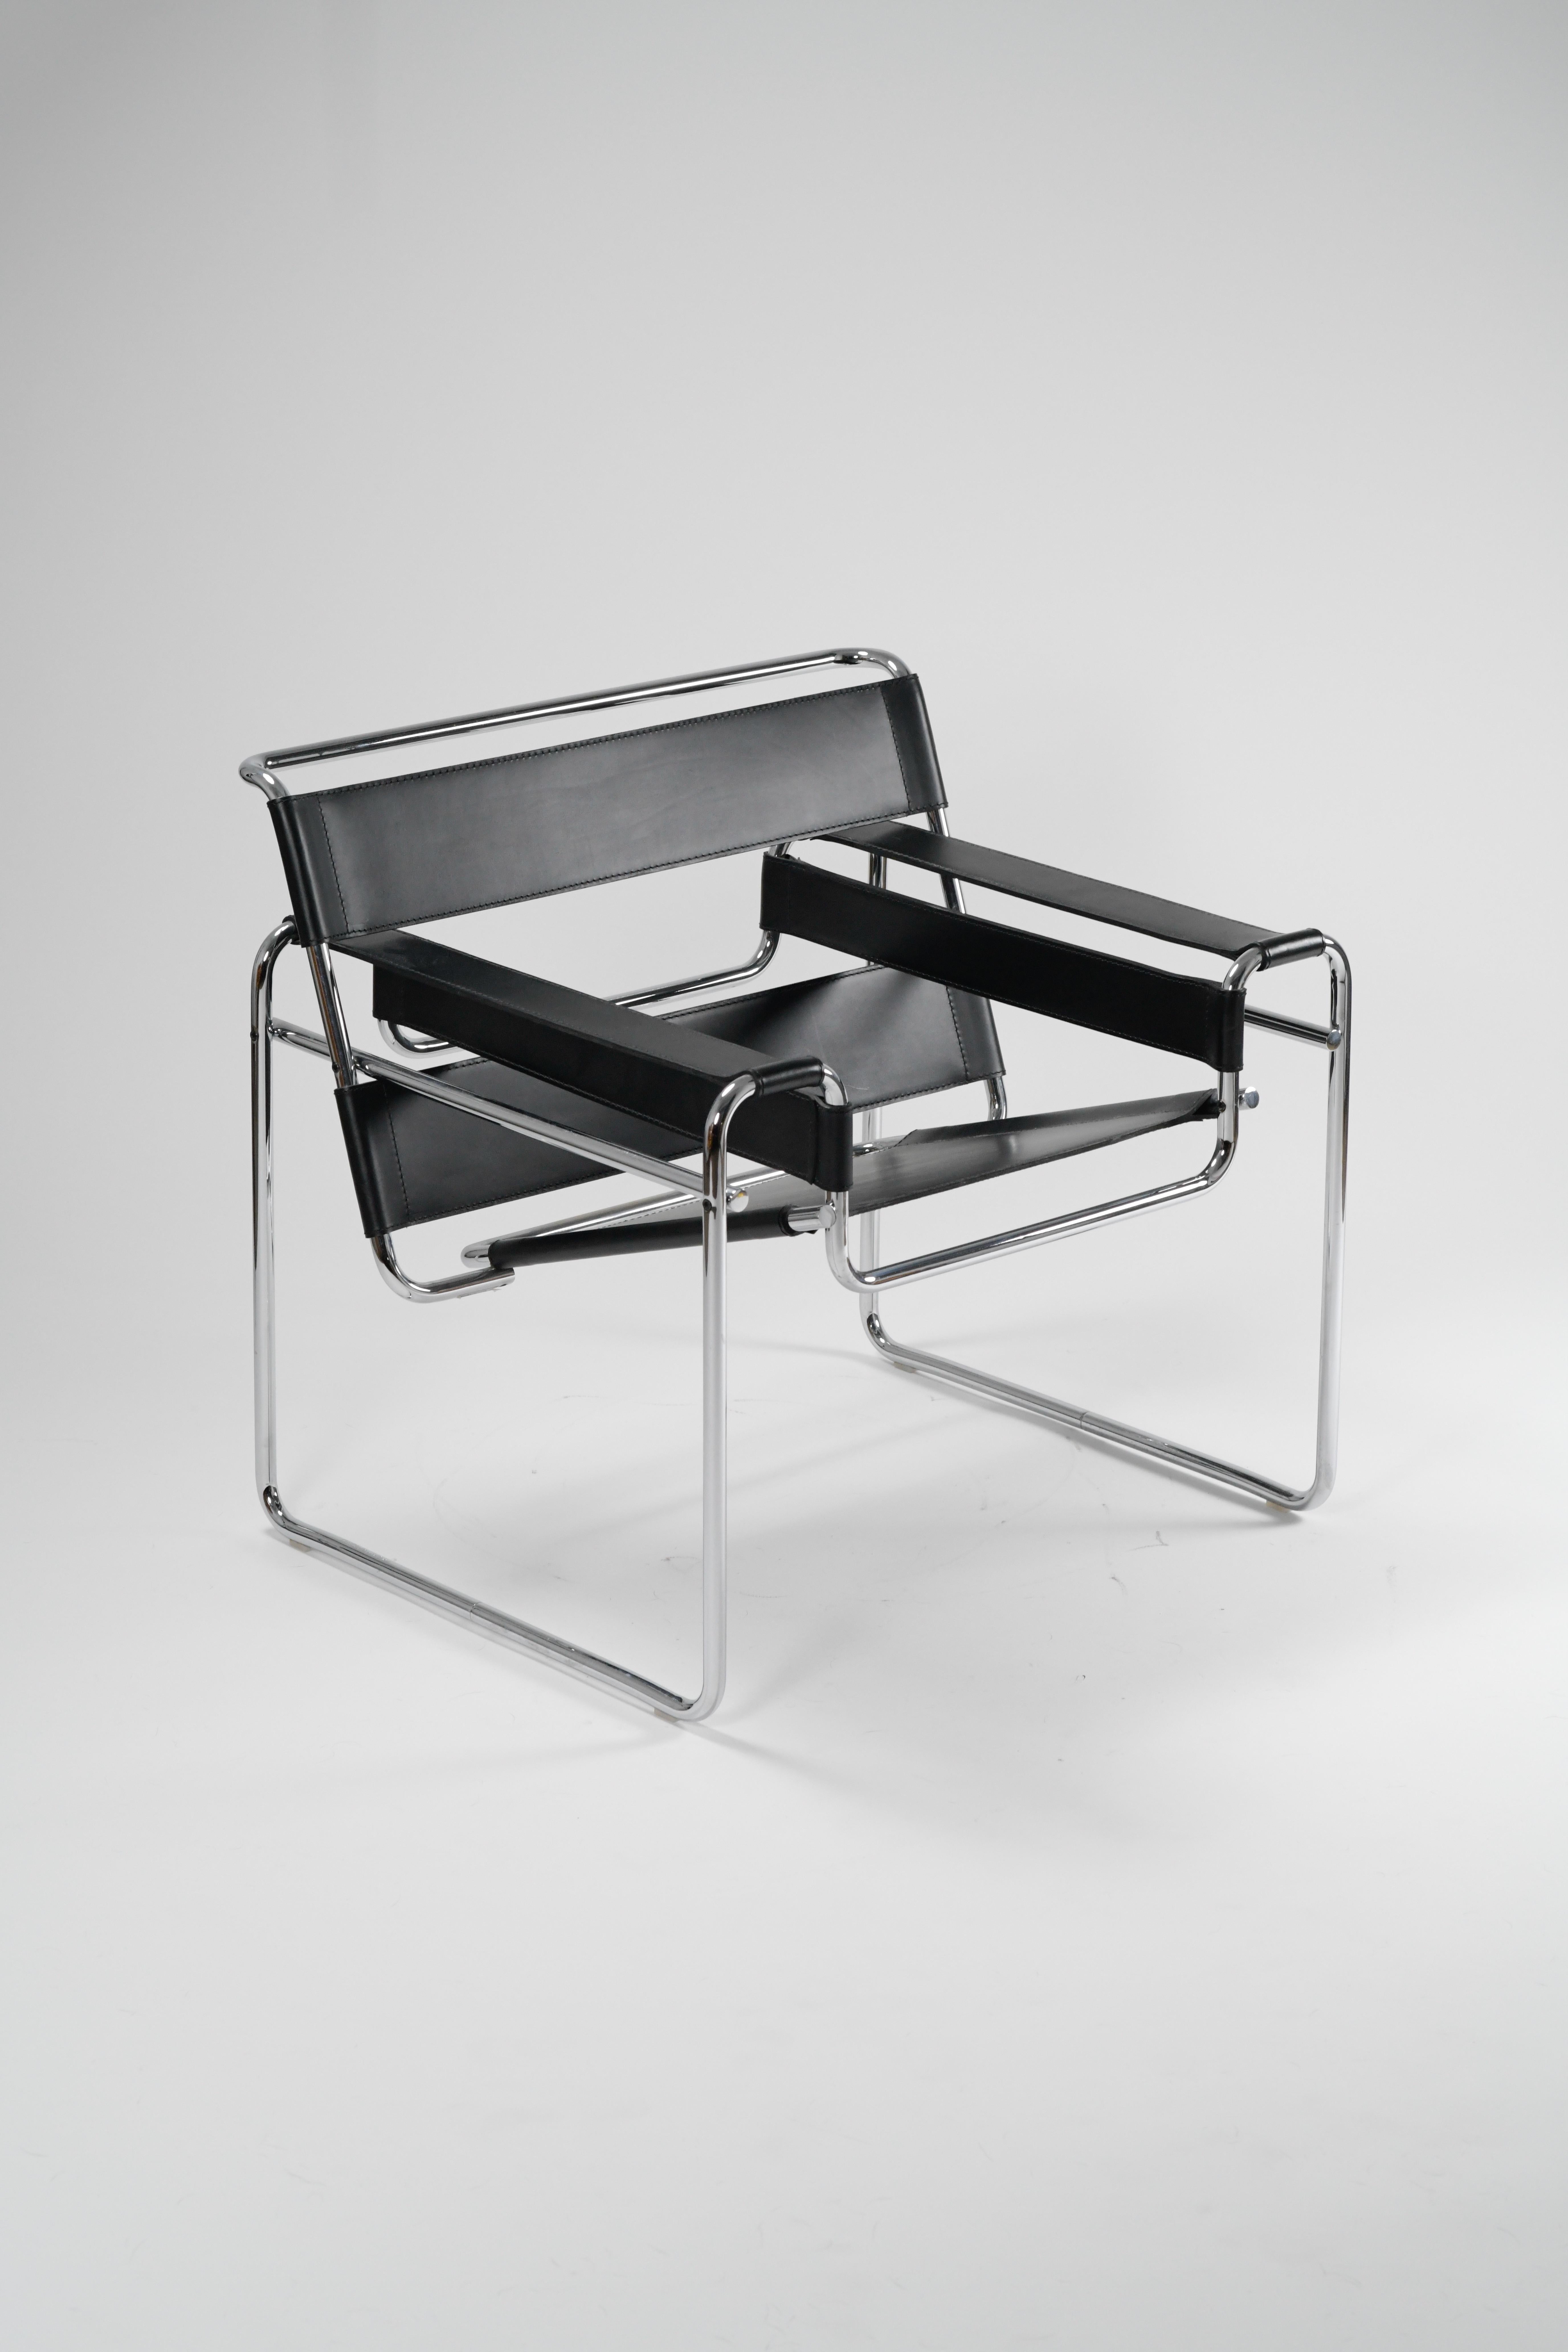 The iconic Wassily chair by Marcel Breuer for Knoll. Originally known as the model B3 chair, this monumental piece of Mid Century Design was first conceived at the Bauhaus by Breuer in 1926 and has since been produced by many different manufacturing